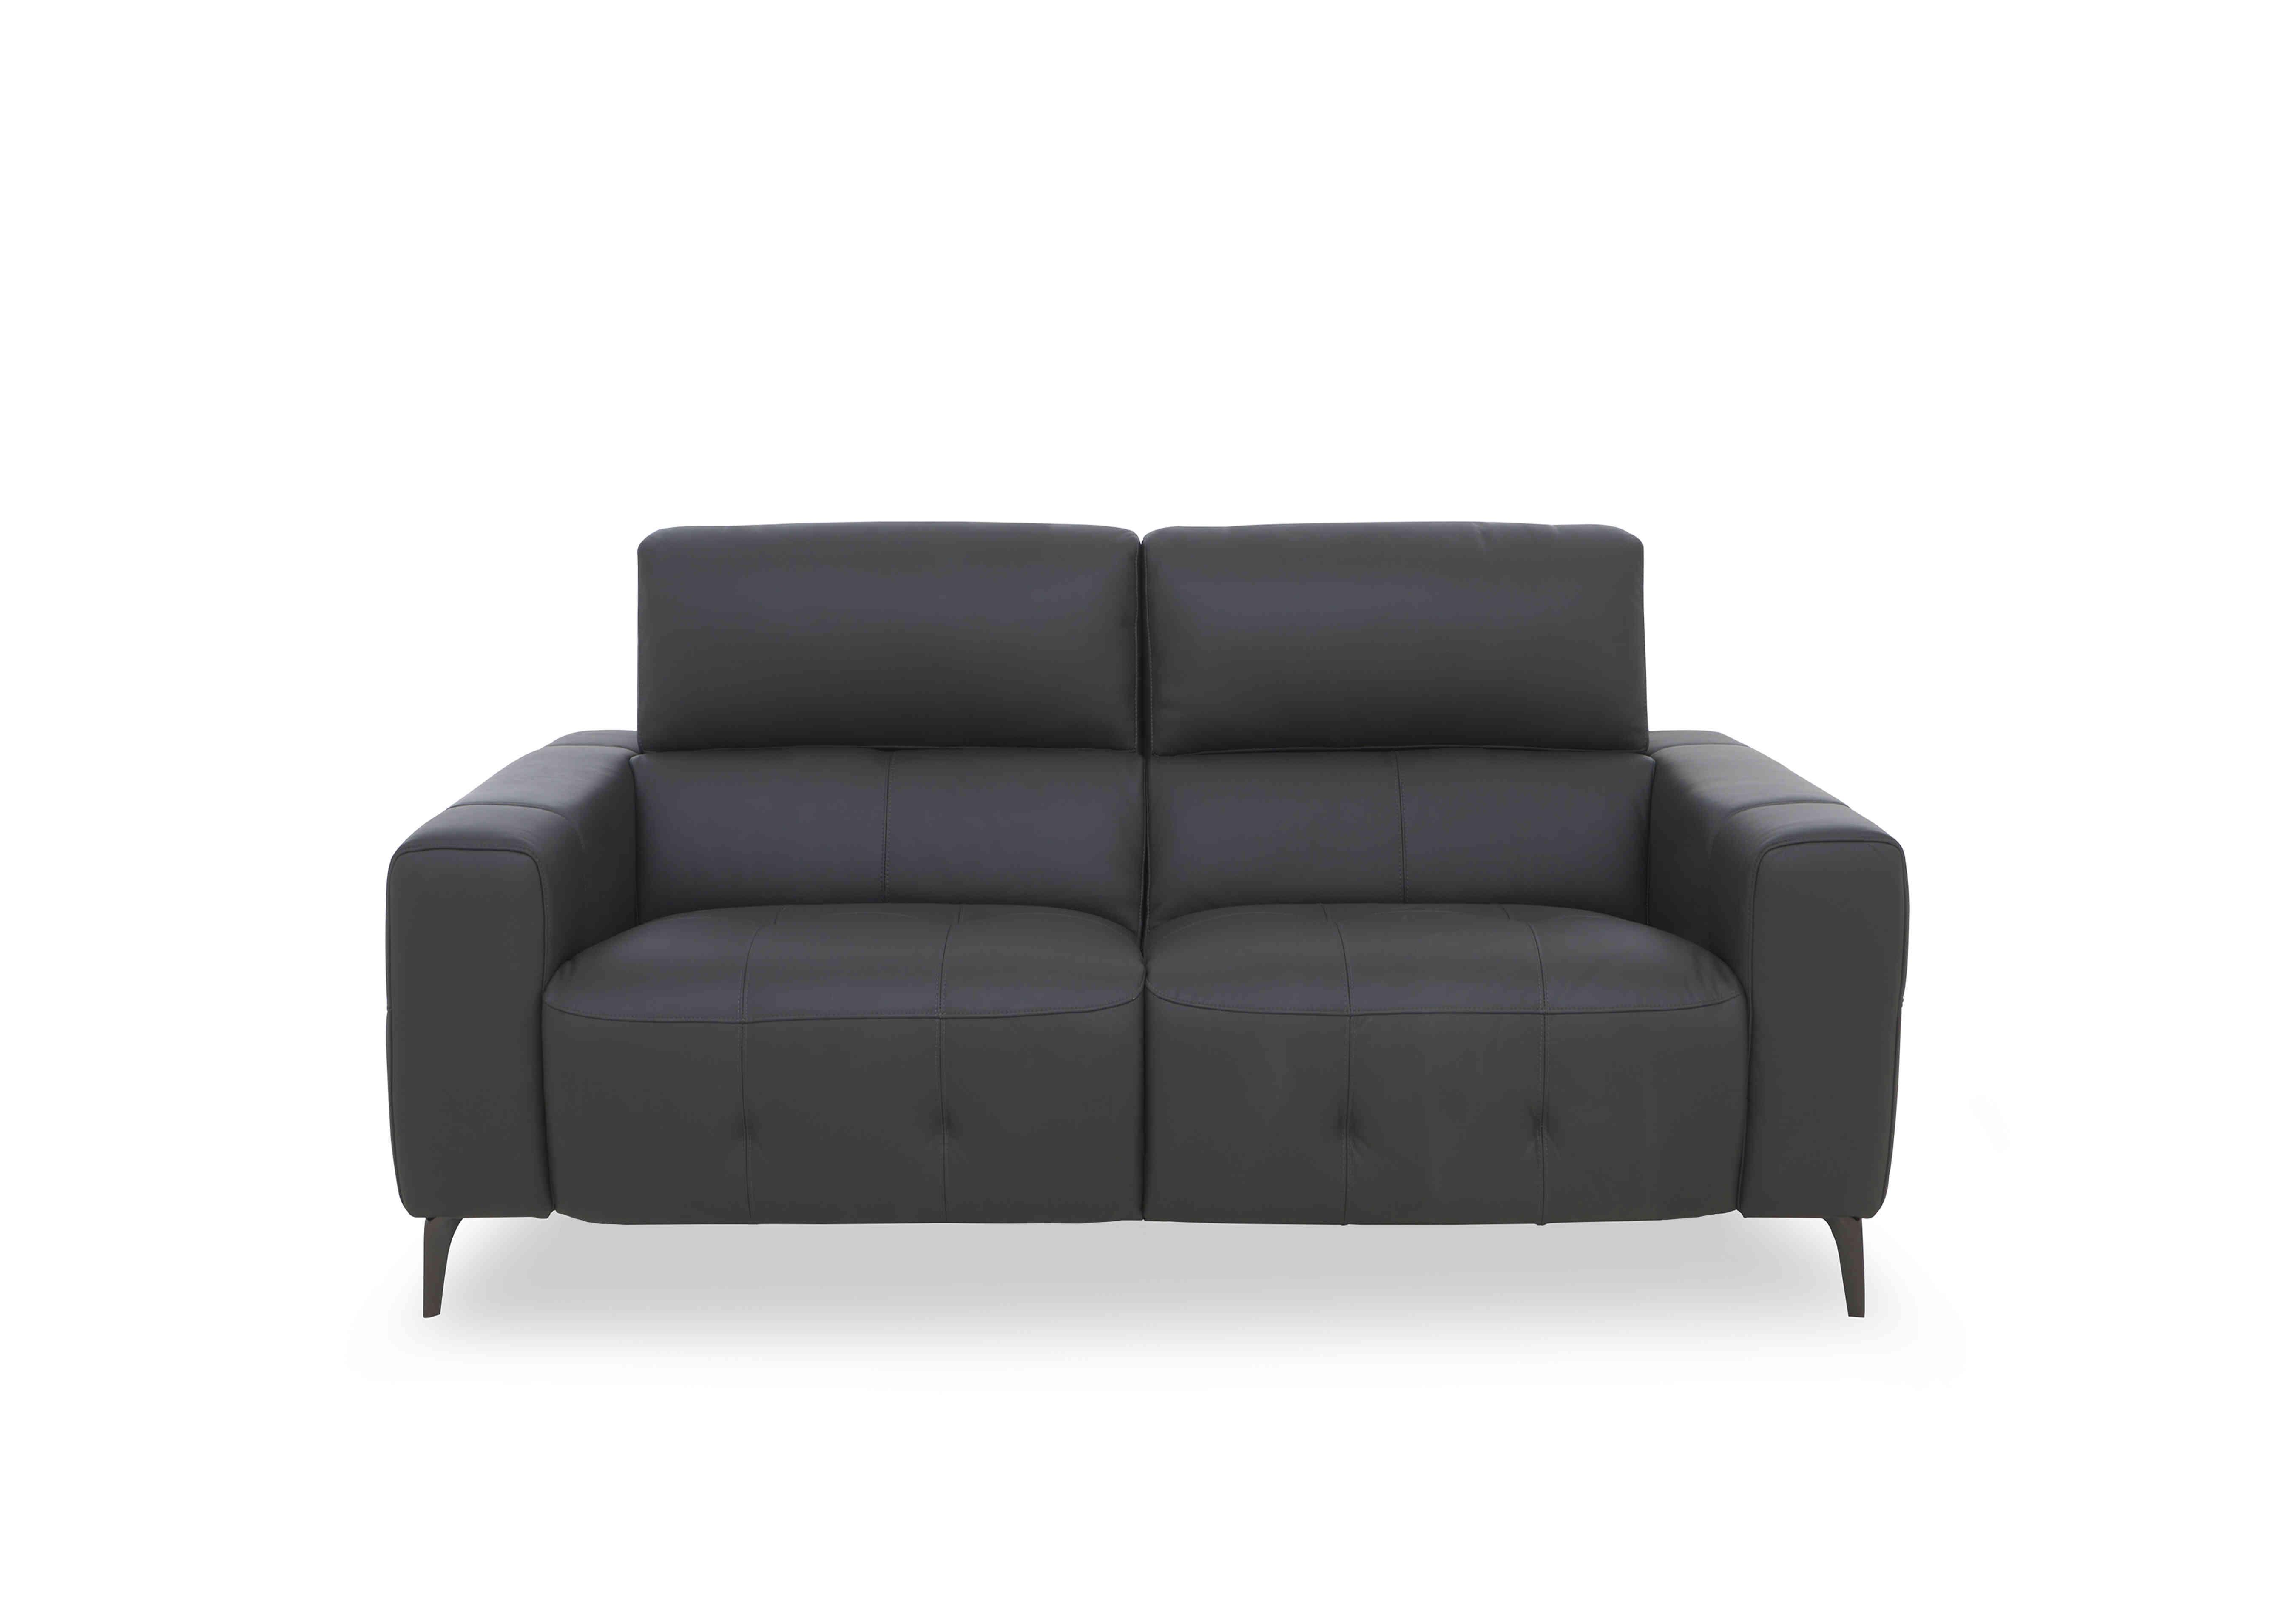 New York 2 Seater Leather Sofa in Nw-517e Shale Grey on Furniture Village